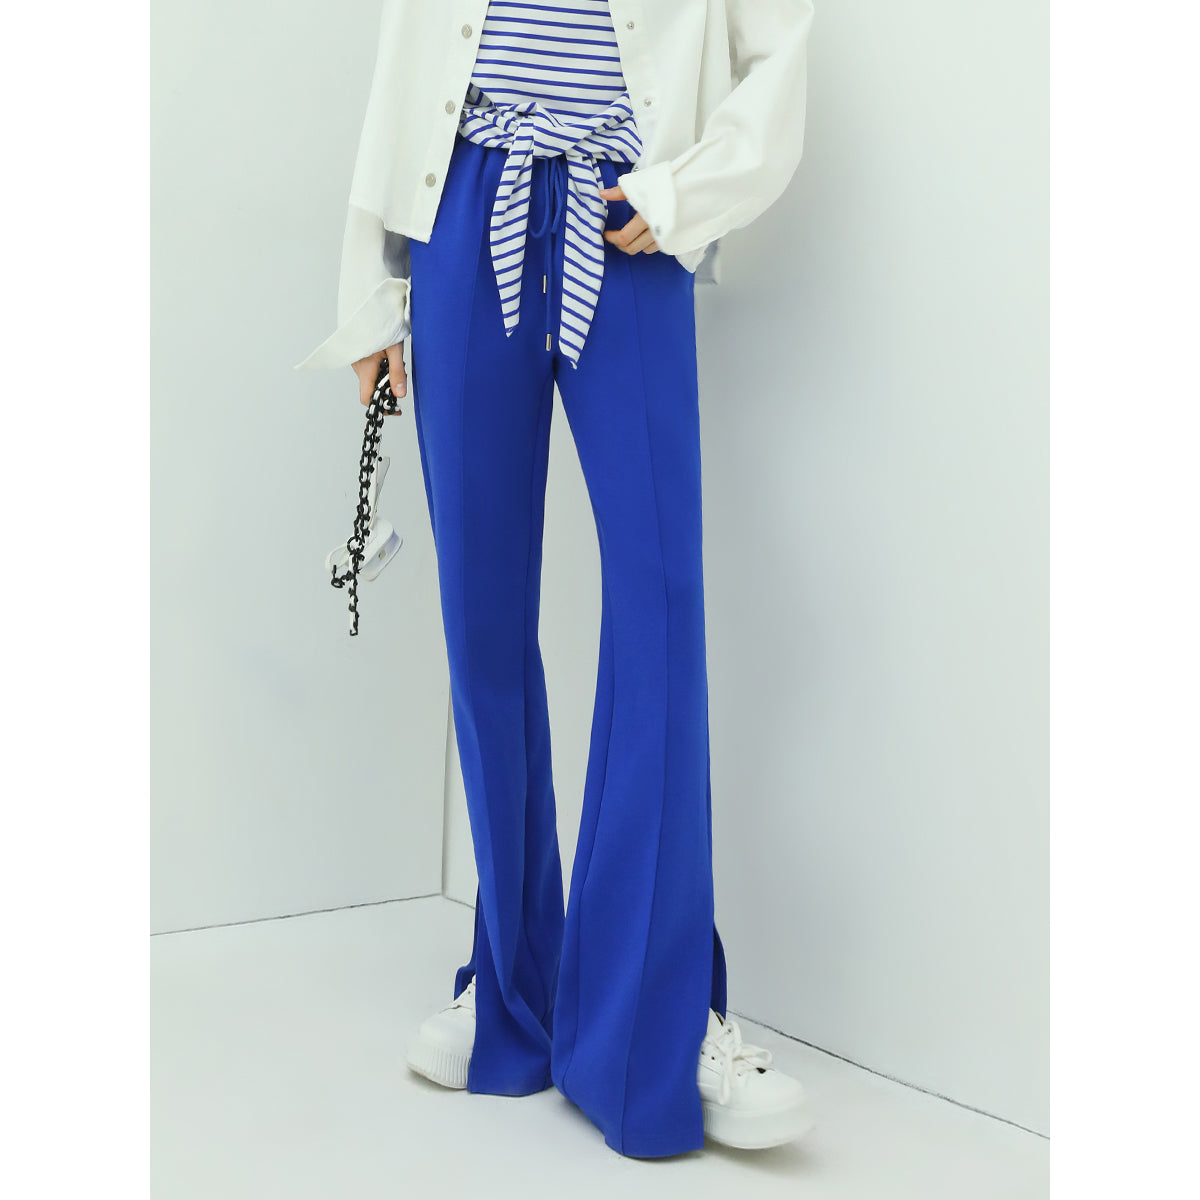 breathable-casual-flared-pants-with-side-slits_all_blue_1.jpg